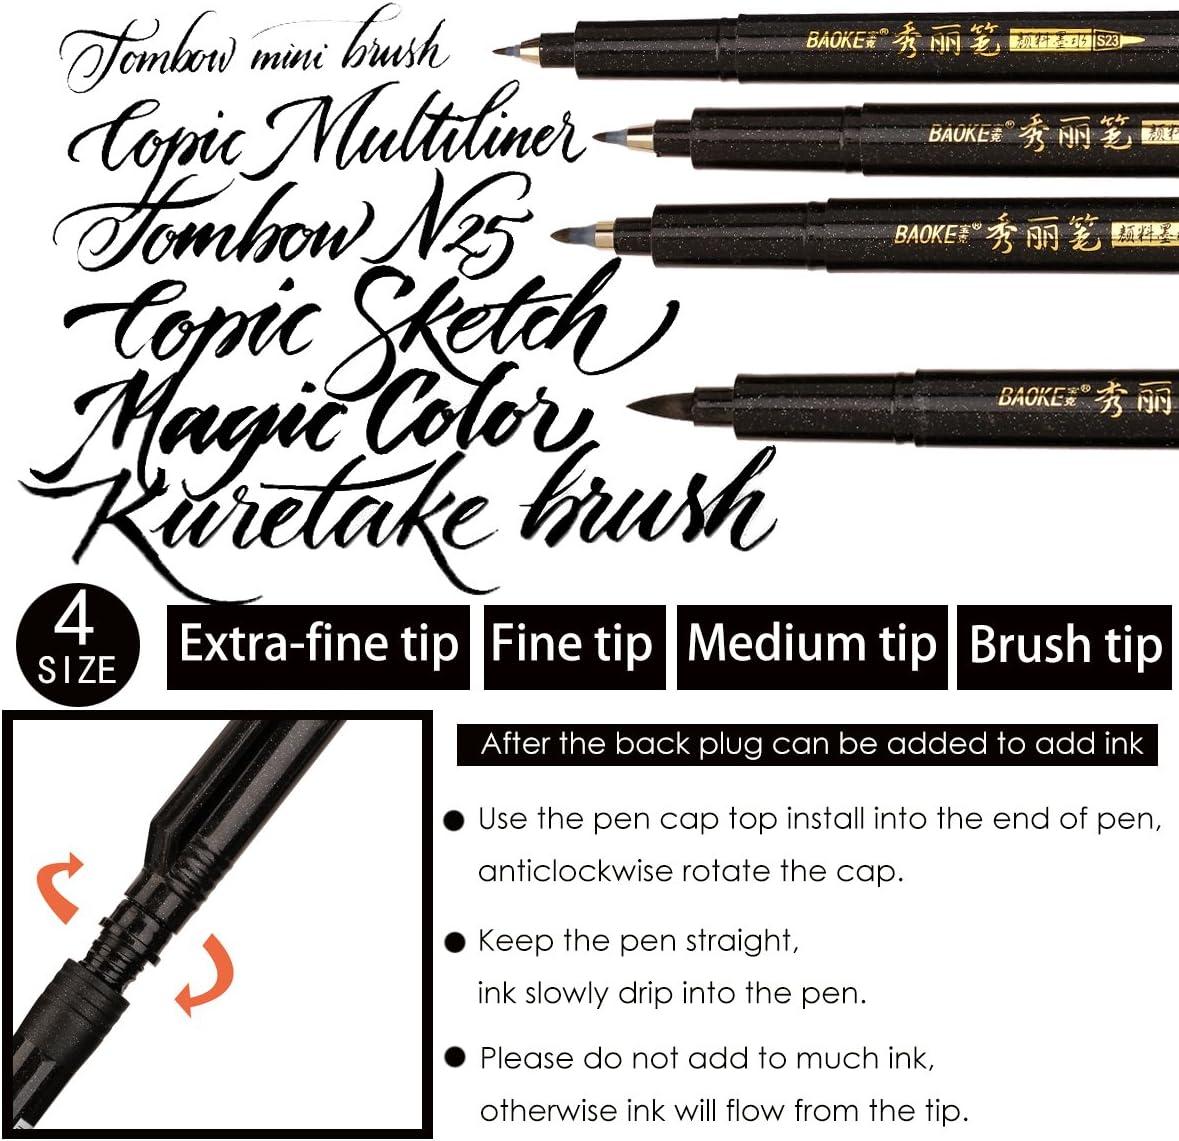 Brush Pen: Extra Thin Tip, Pigment Ink, refillable